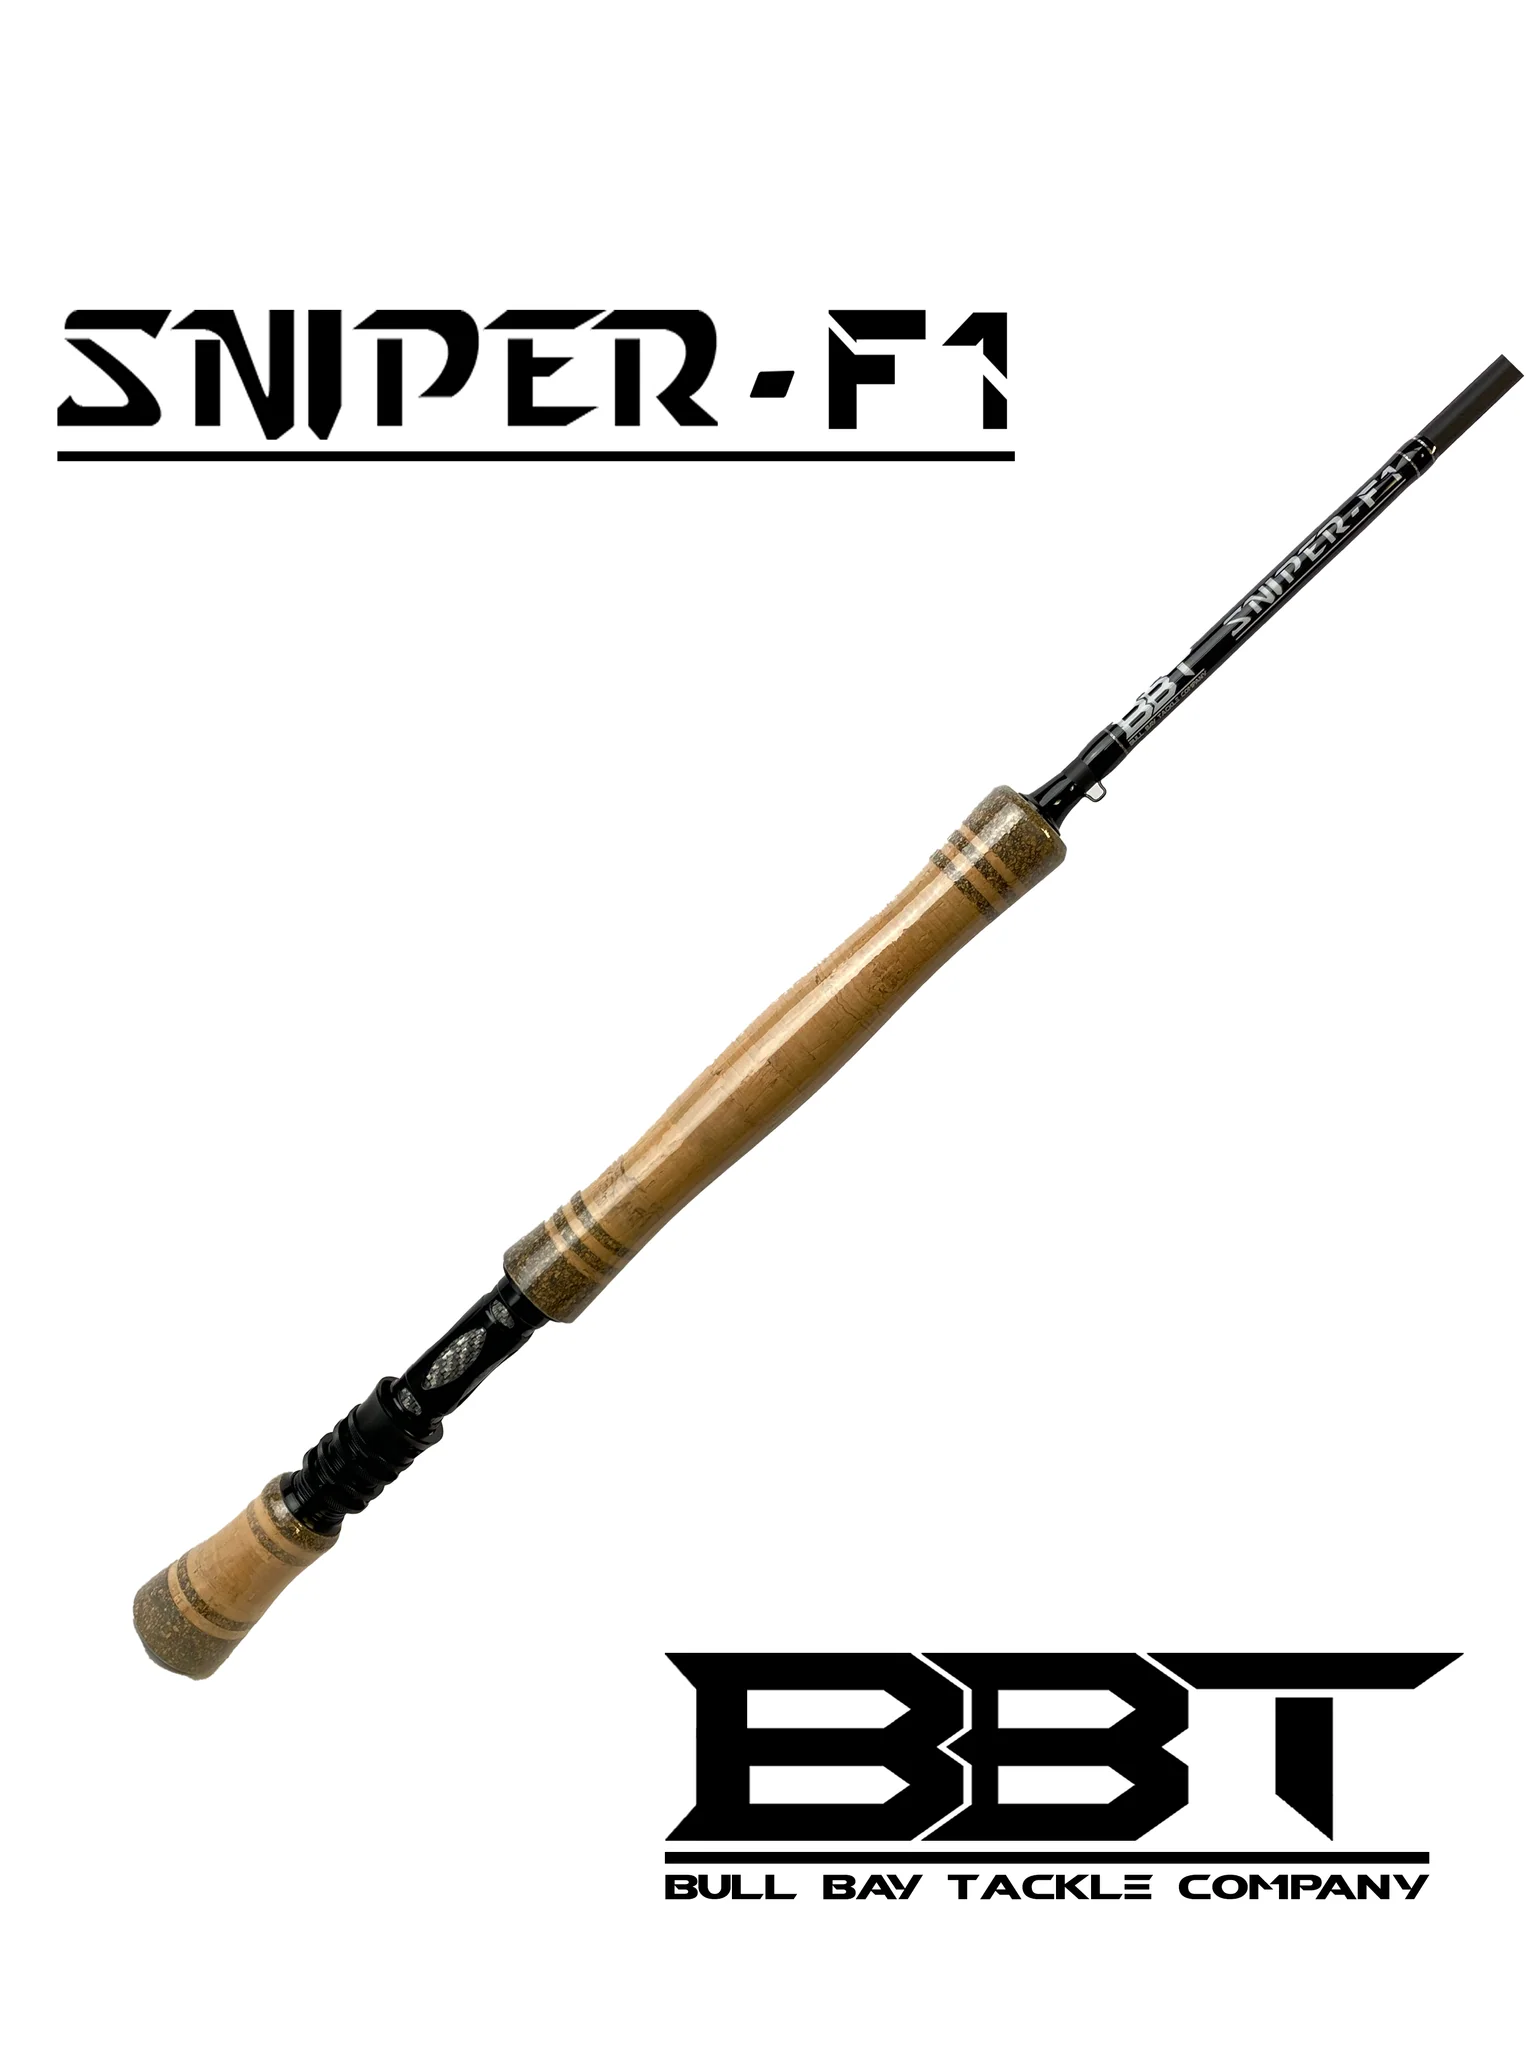 Bull Bay Tackle Sniper F-1 Fly Rod 9wt - Andy Thornal Company